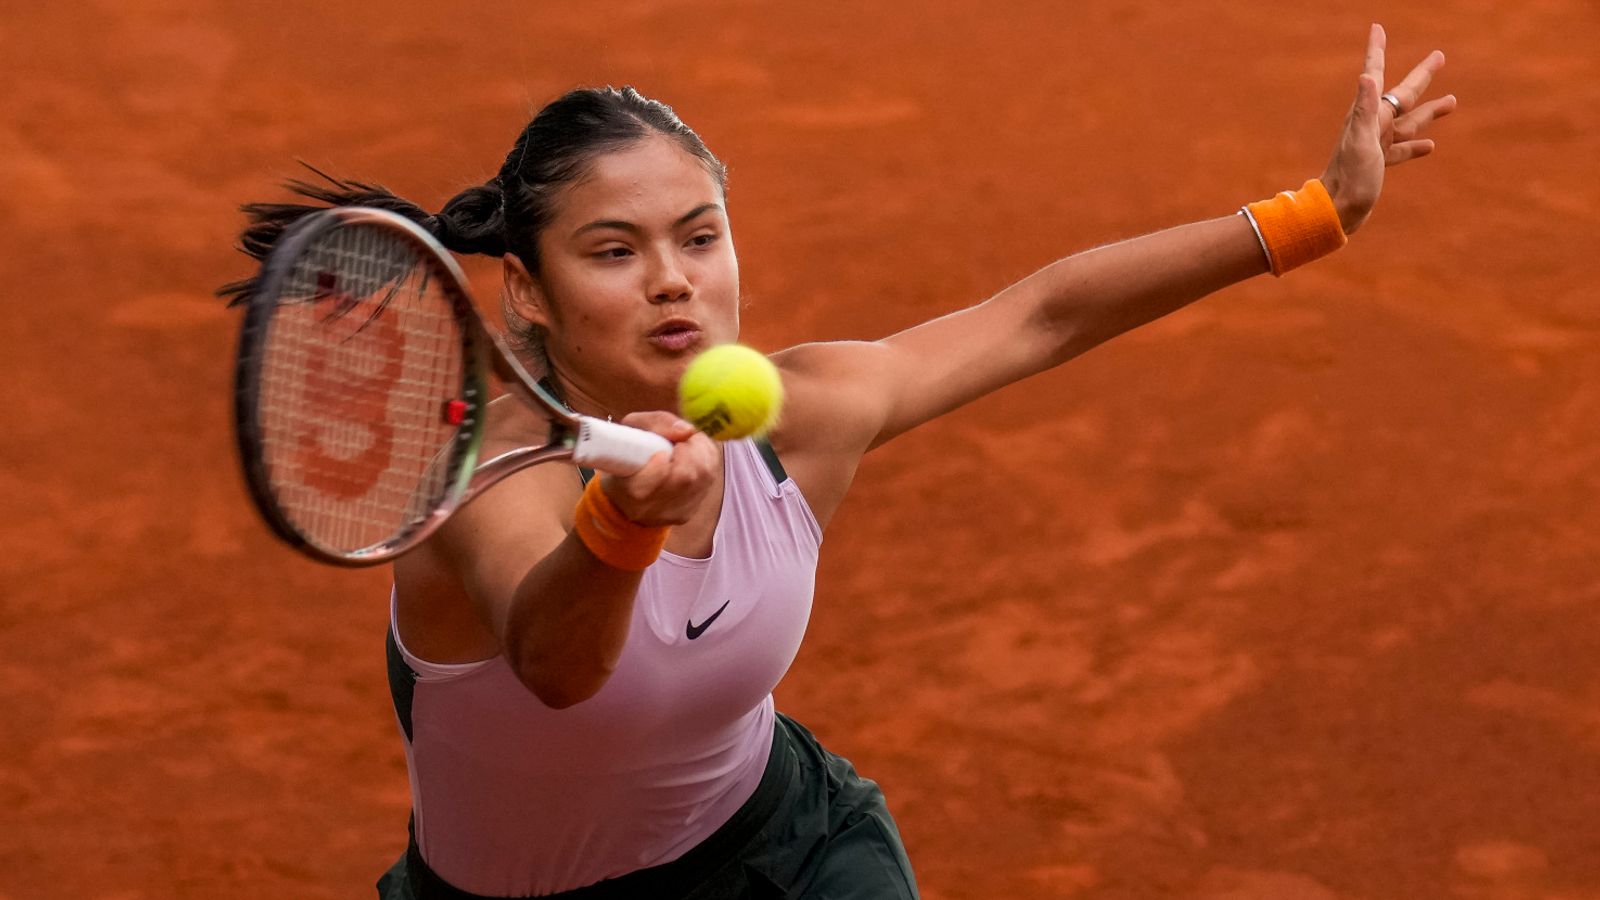 Emma Raducanu ahead of French Open Grand Slam: I could be great clay-court player; preparations normal after back injury